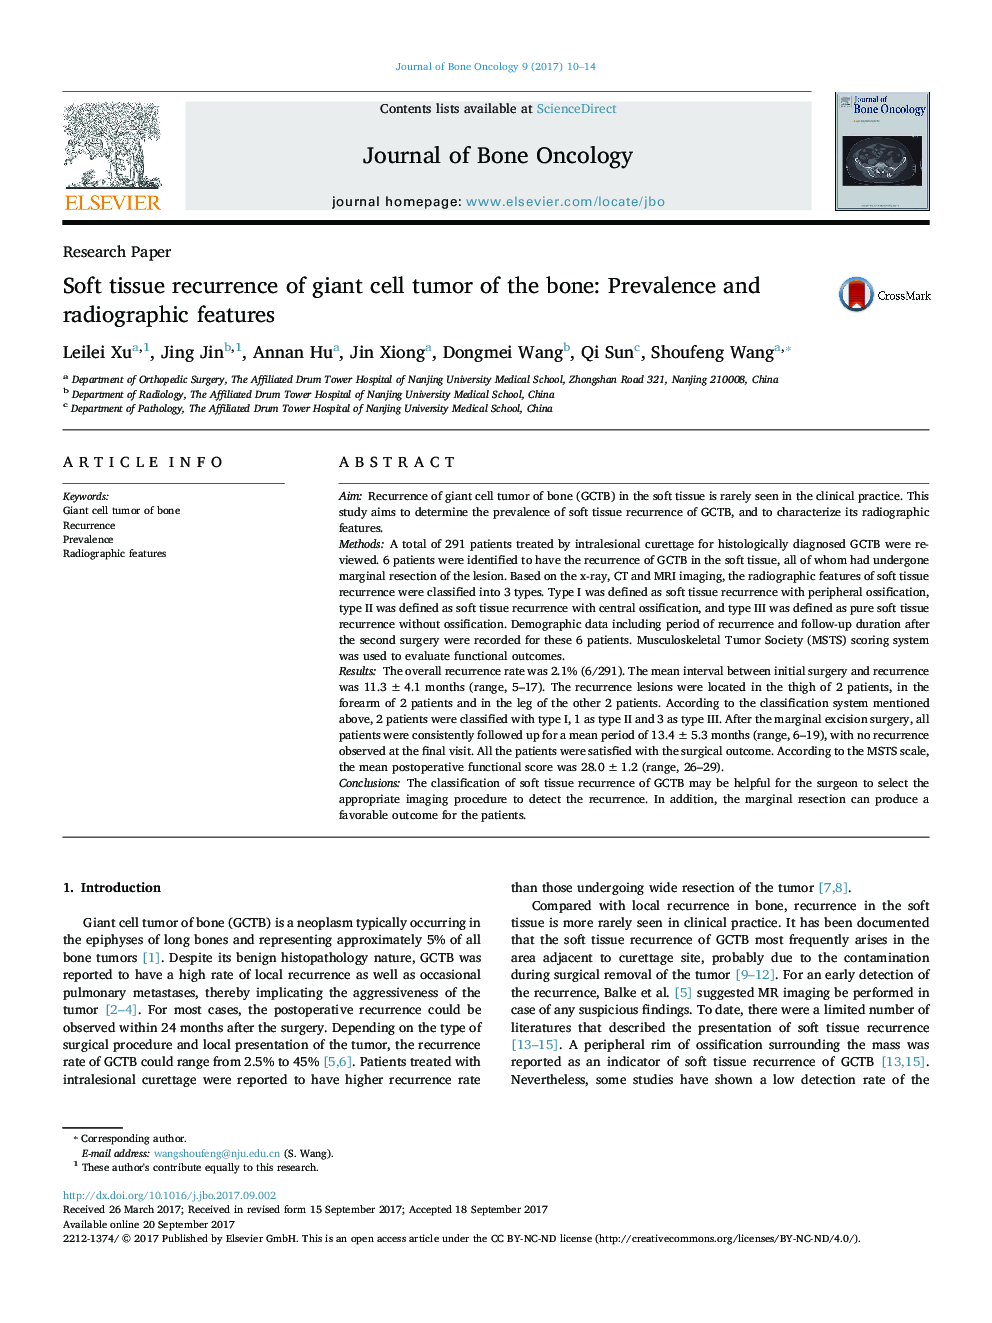 Soft tissue recurrence of giant cell tumor of the bone: Prevalence and radiographic features